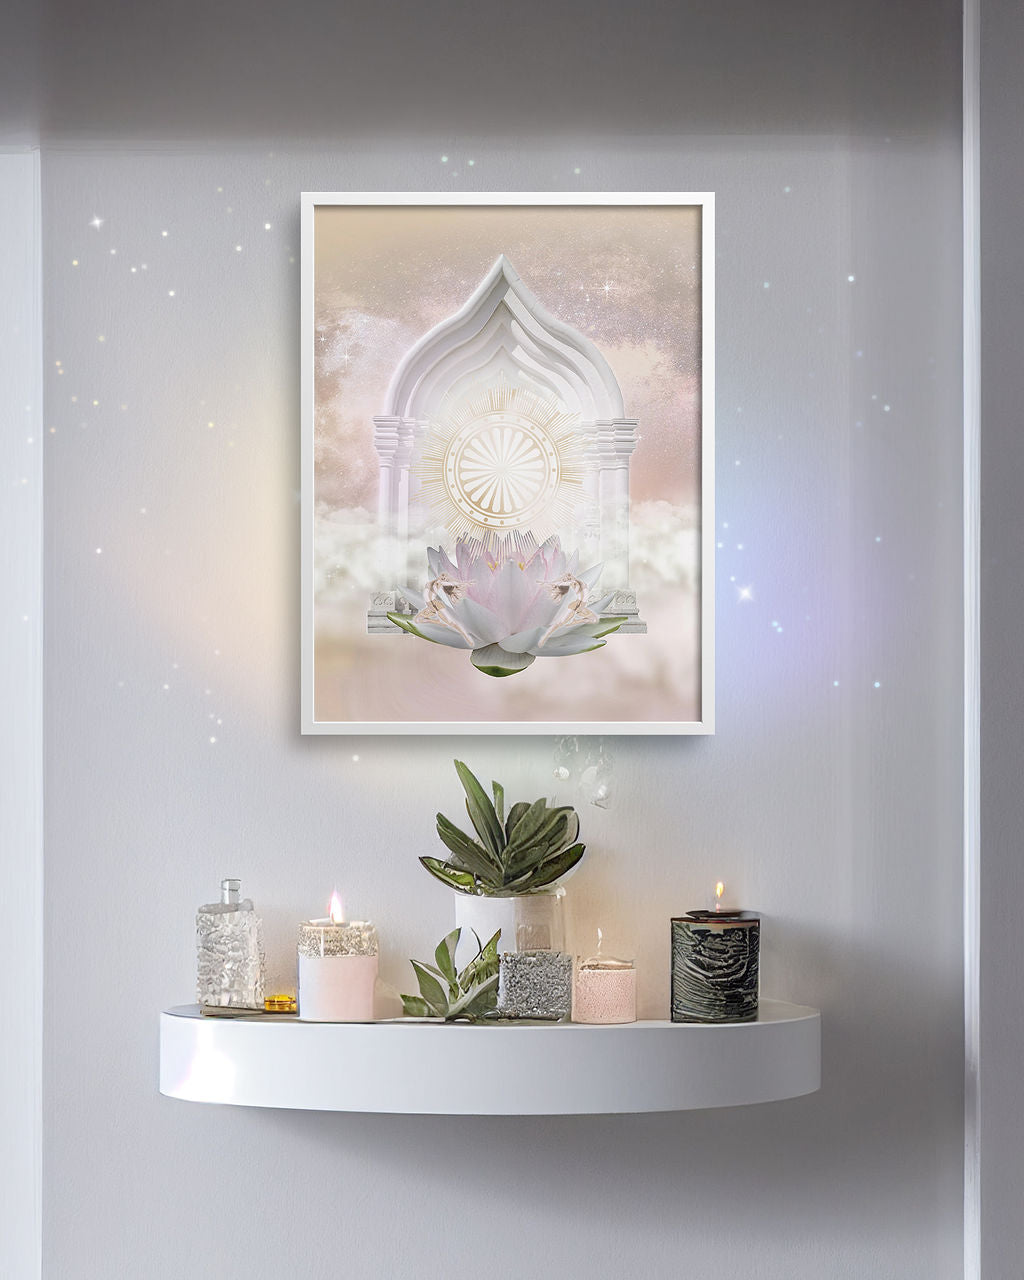 Gateway to Abundance  Leap into a new level of wealth and empowered prosperity. Hang this fine art print in any space where you’d like to upgrade your sense of abundance.